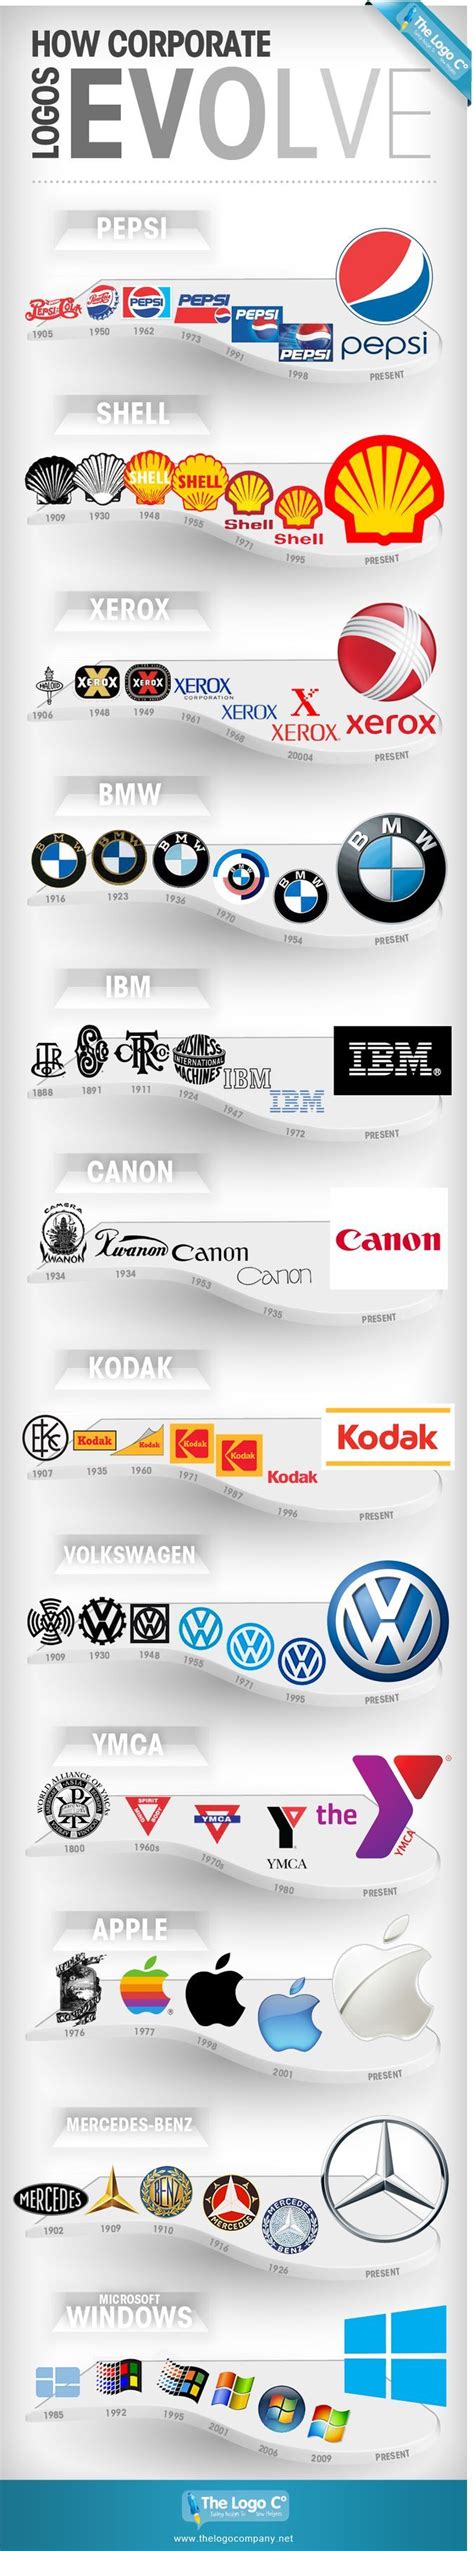 Corporate Logos Evolution Over The Years Media